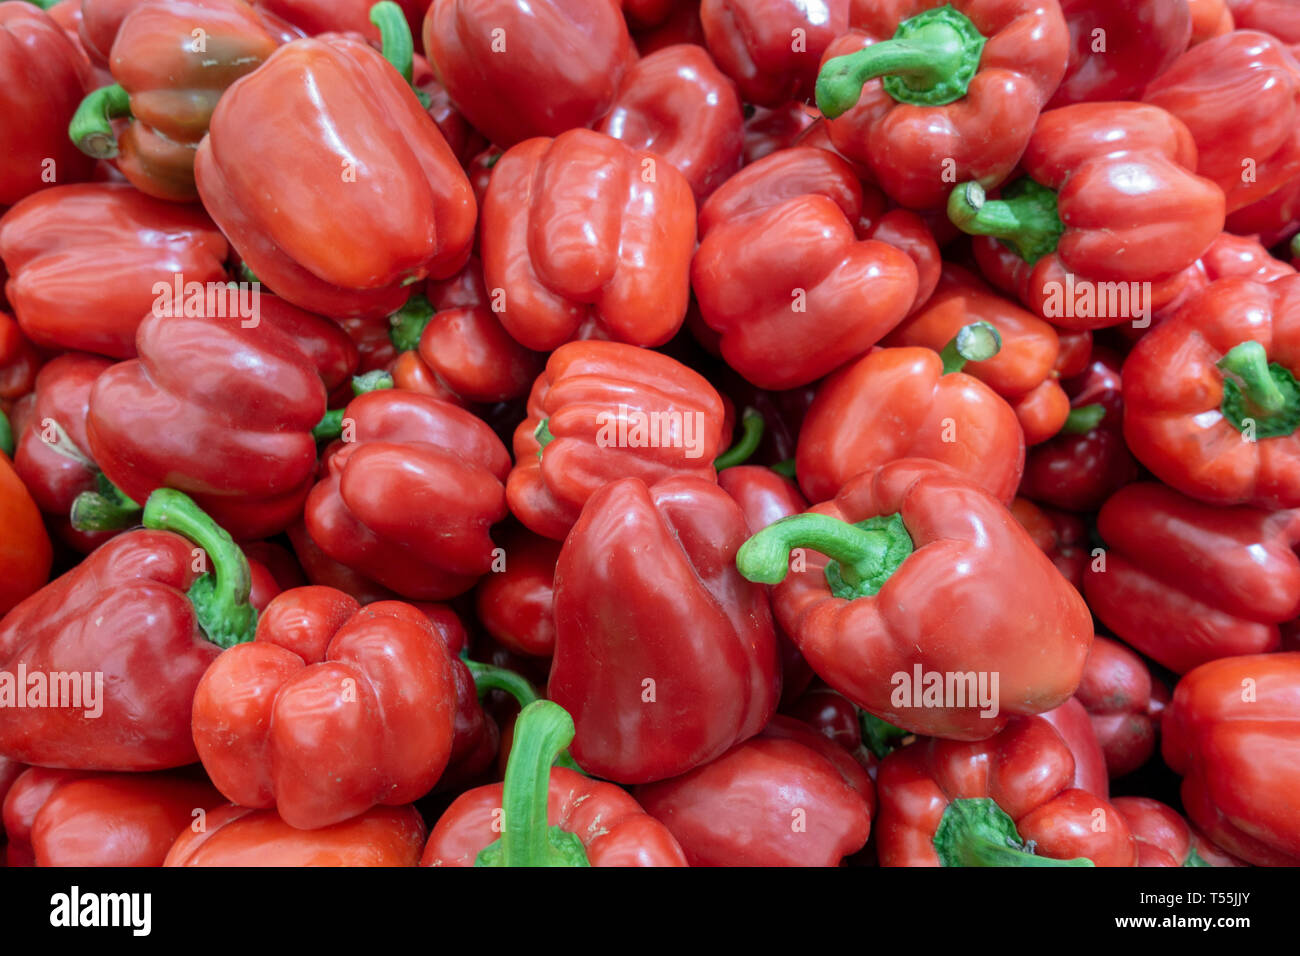 Fresh red pepper harvest close up on the market. Stock Photo